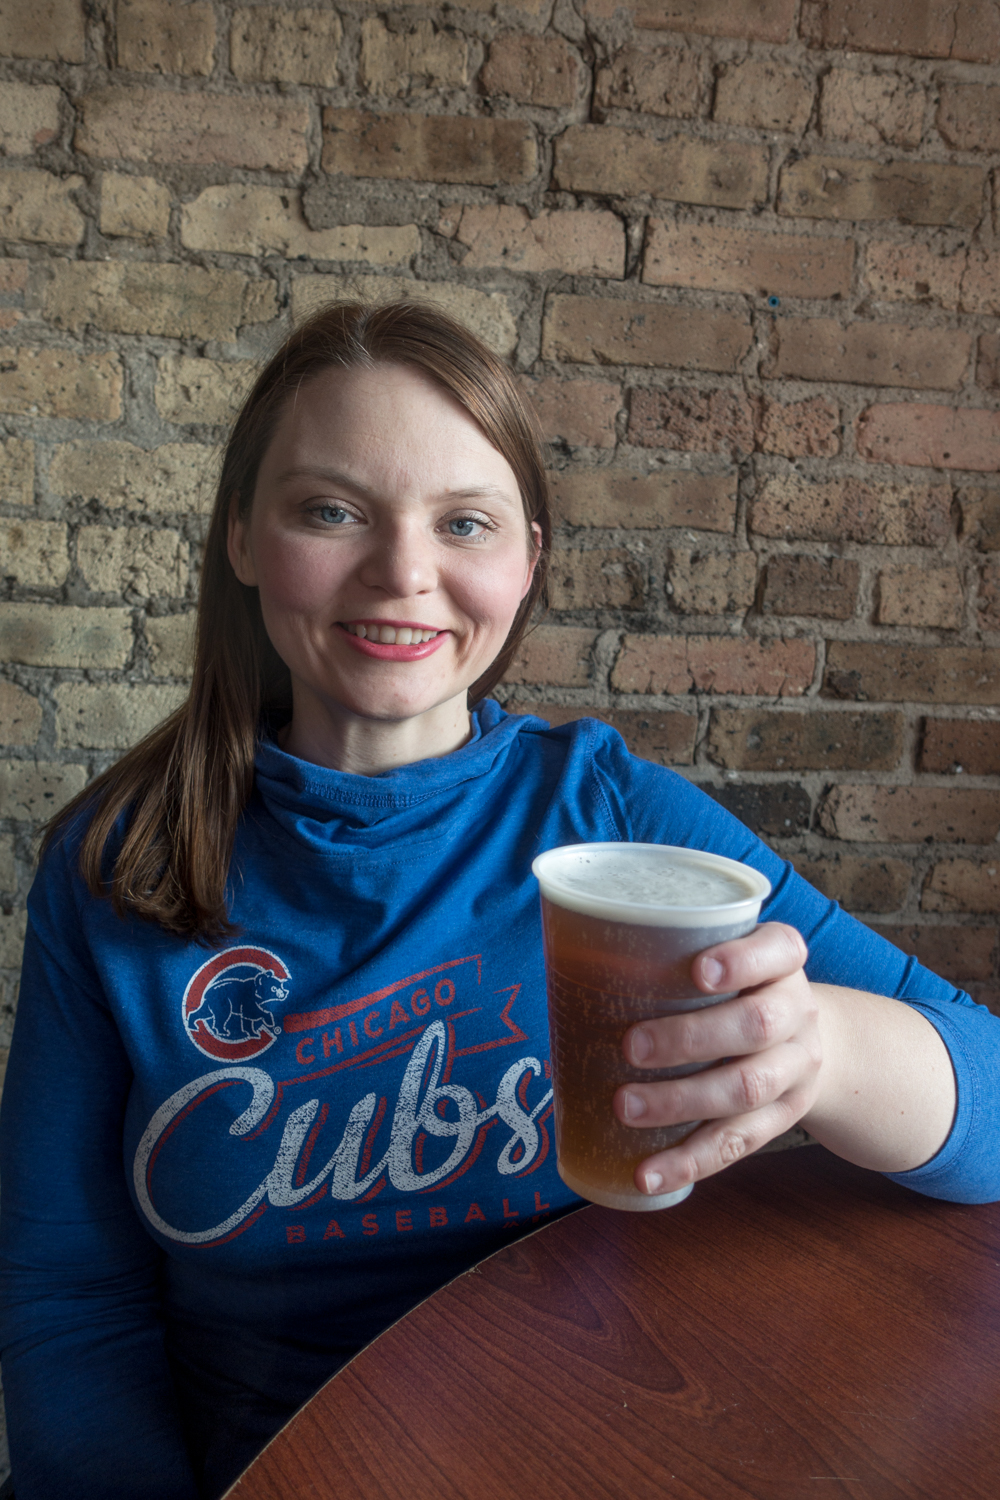 Travel Guide to Wrigleyville in Chicago: Tips for seeing the Cubs play at Wrigley Field. #Chicago #Cubs #baseball #sports #travel #summer #midwest #travel #getaway #Illinois #trip #guide #planning 